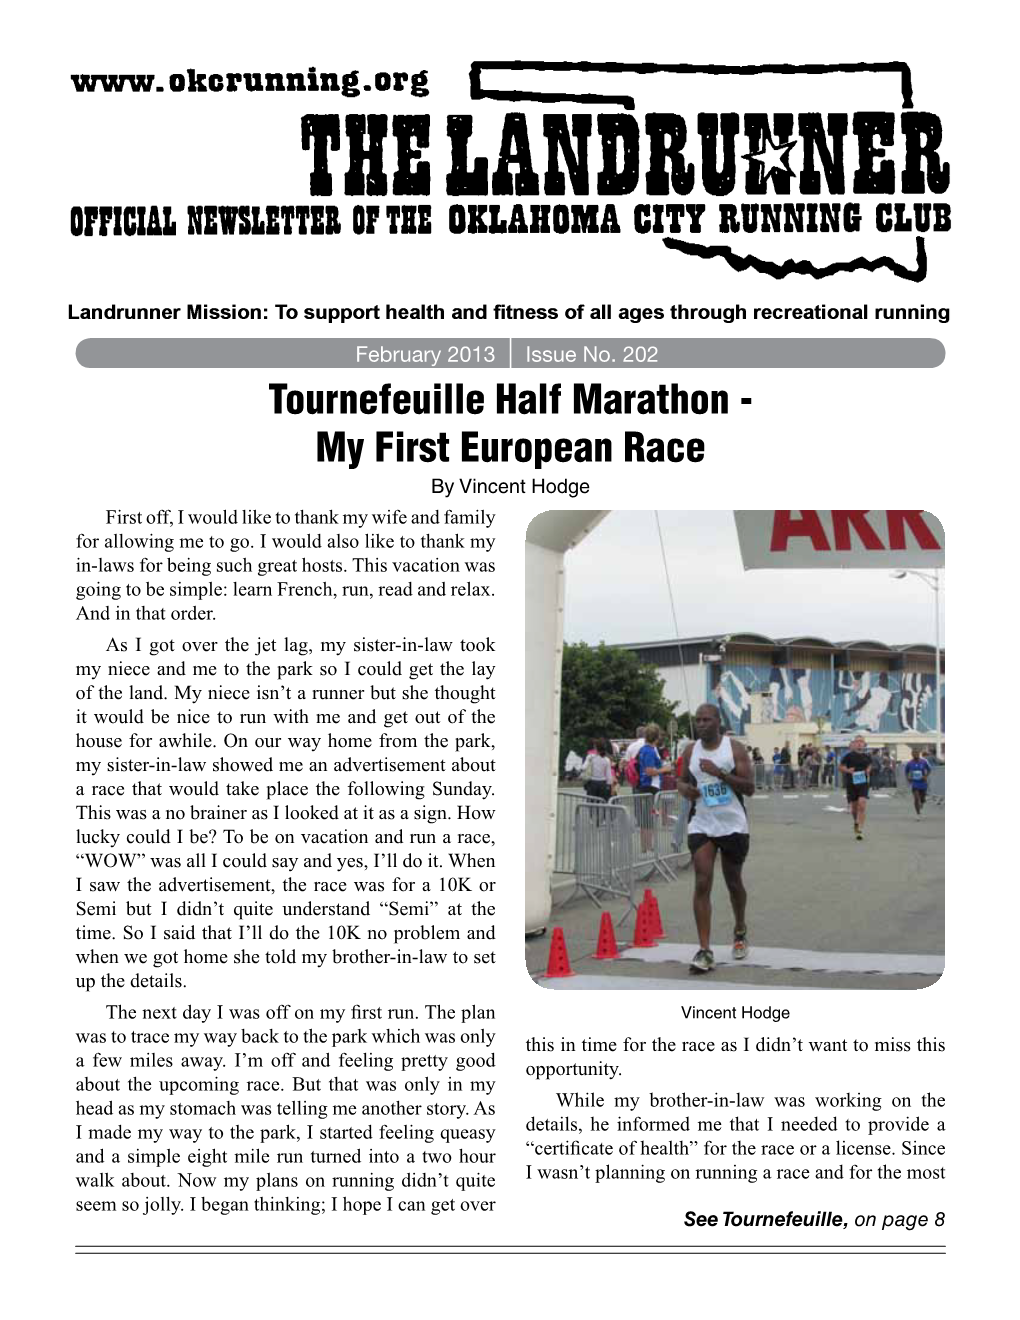 Tournefeuille Half Marathon - My First European Race by Vincent Hodge First Off, I Would Like to Thank My Wife and Family for Allowing Me to Go